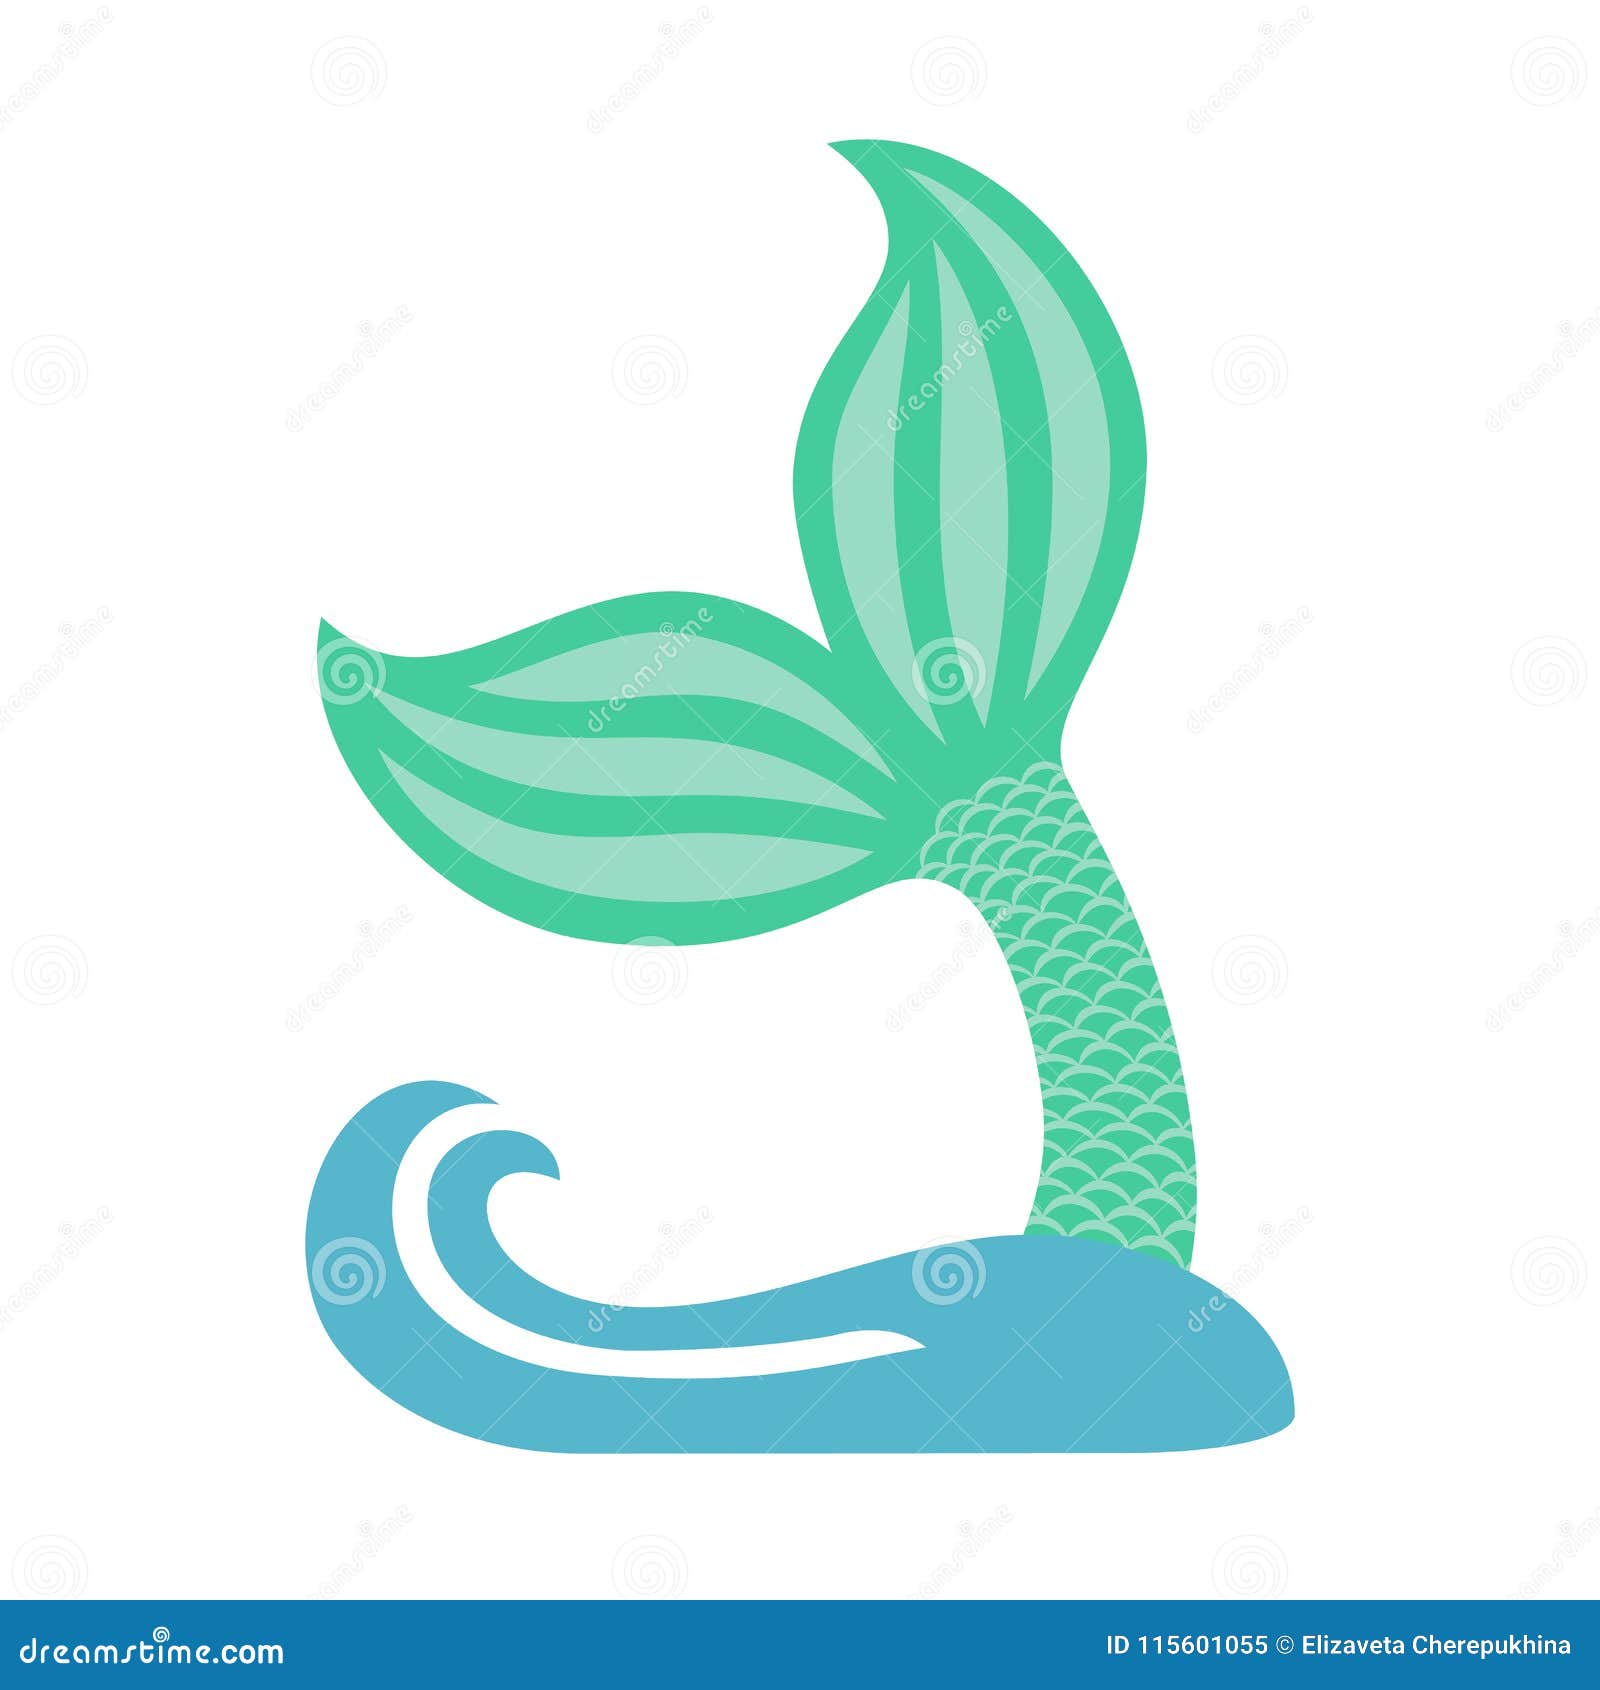 Mermaid Tail with Wave. Silhouette of Whale Tail Icon. Fish Tail